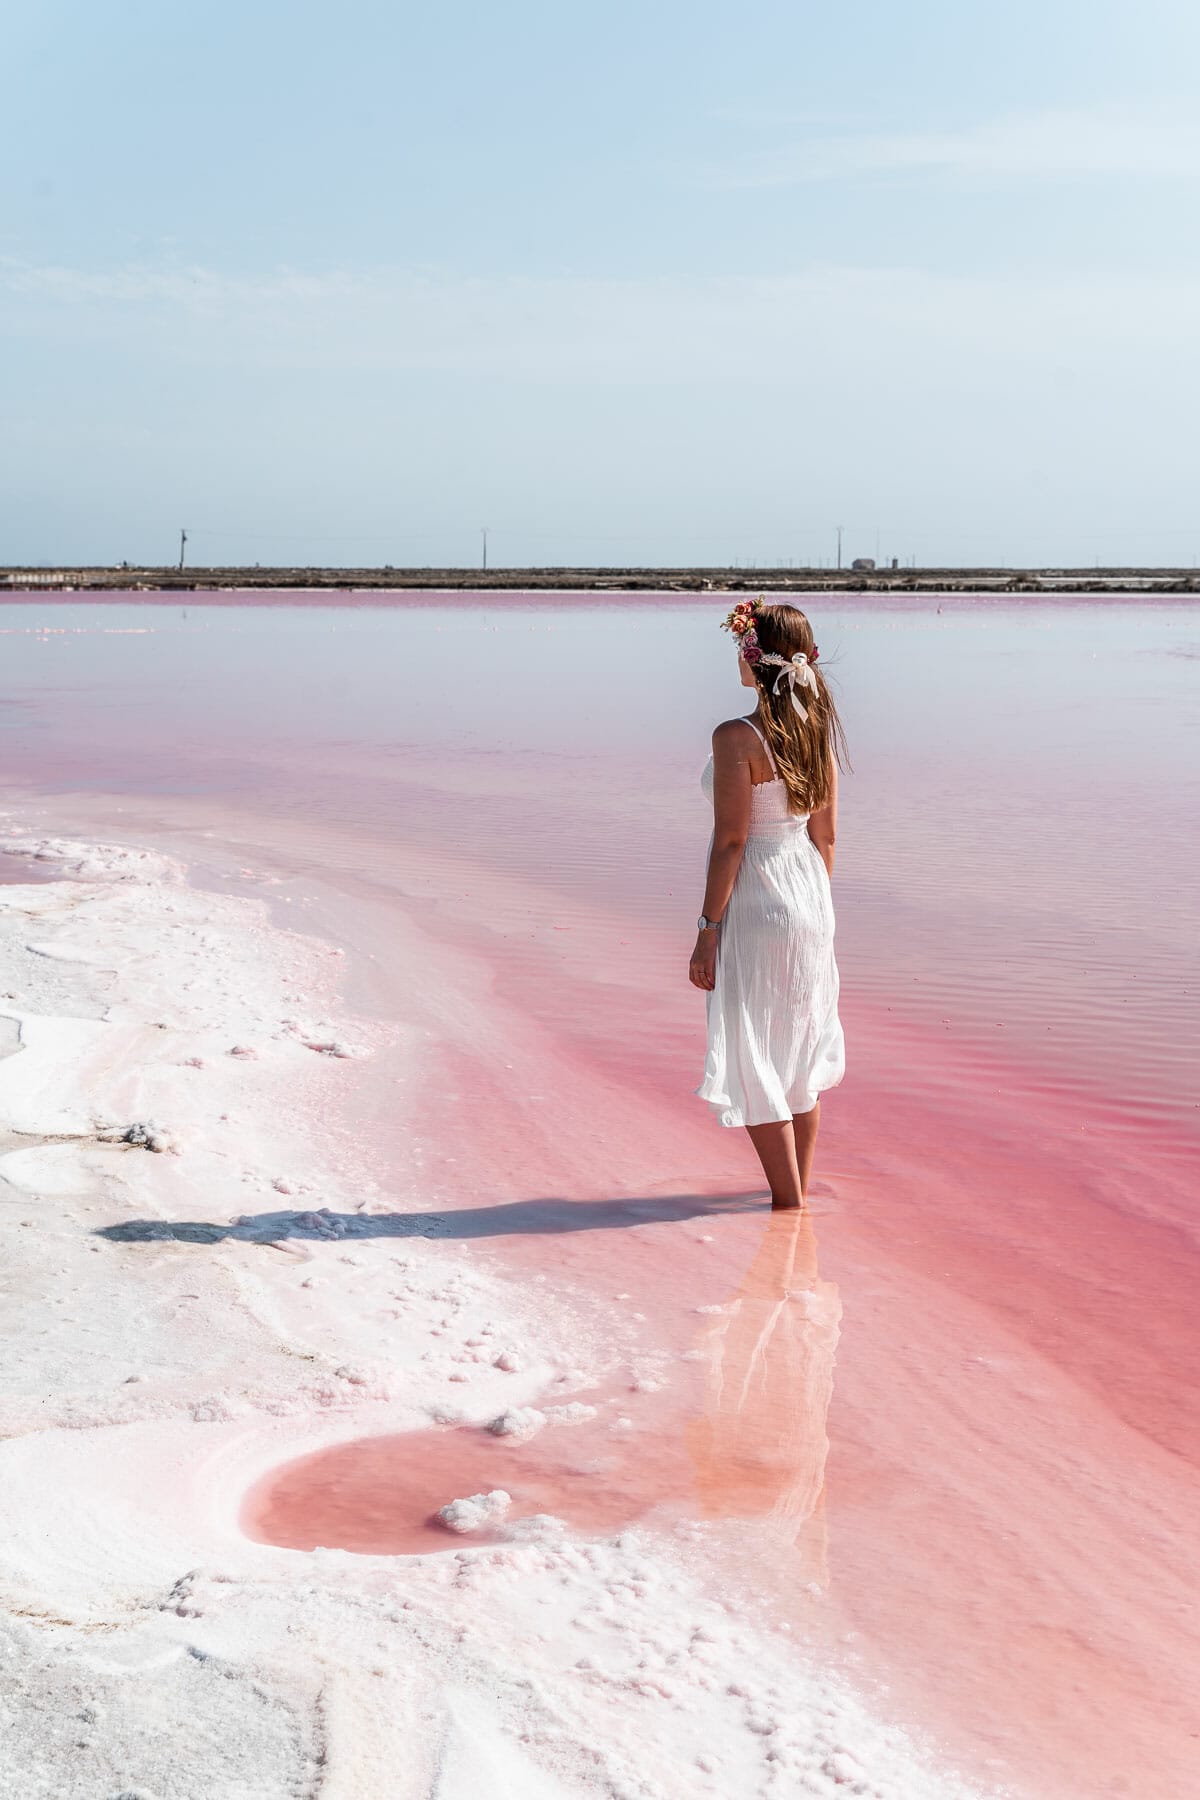 Girl in a white dress standing in a pink lake in France